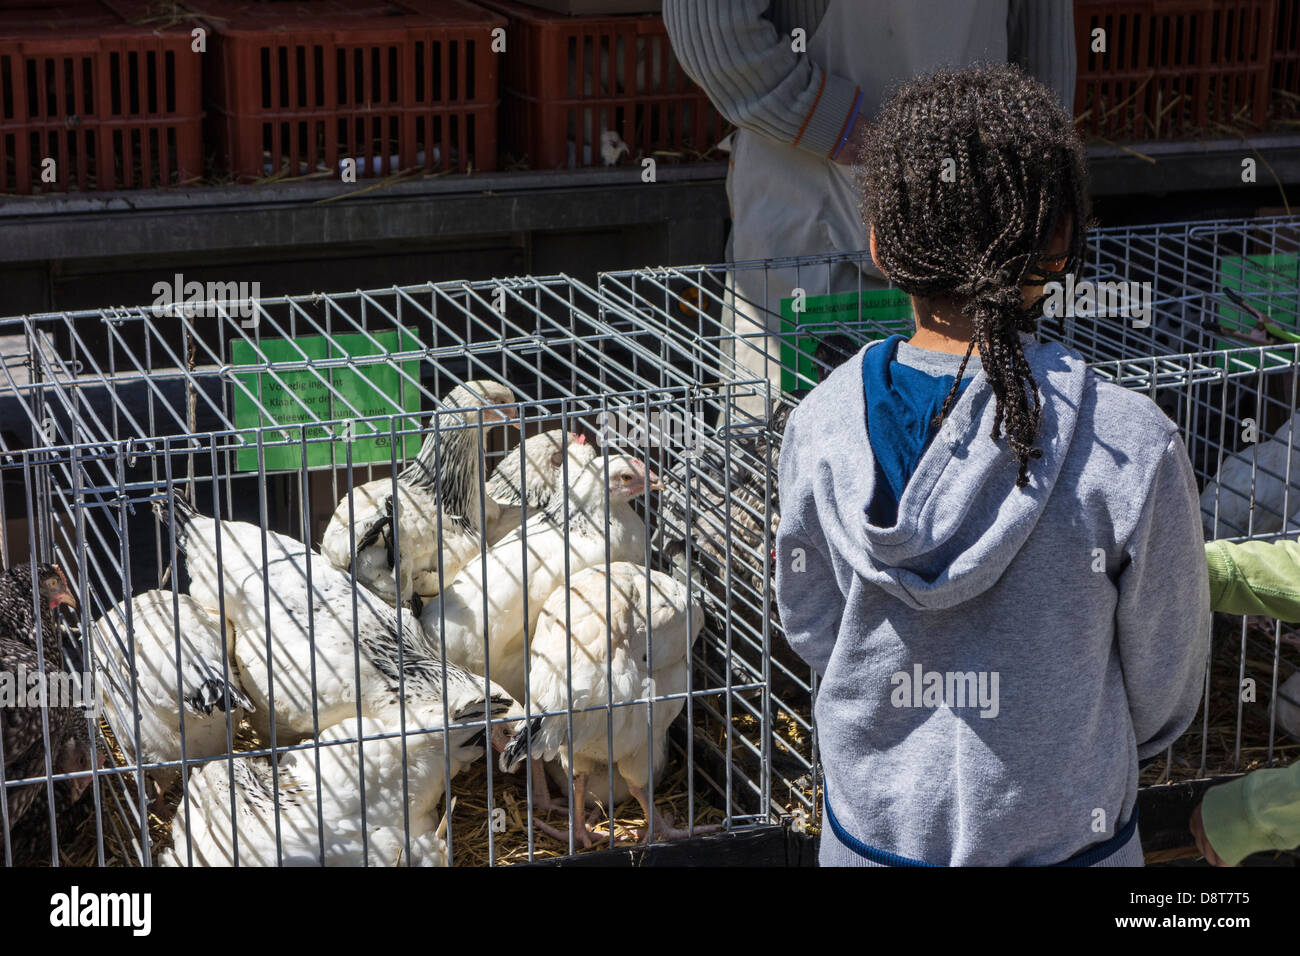 Stallholder in poultry stand and child looking at chickens in cages for sale at domestic animal market Stock Photo